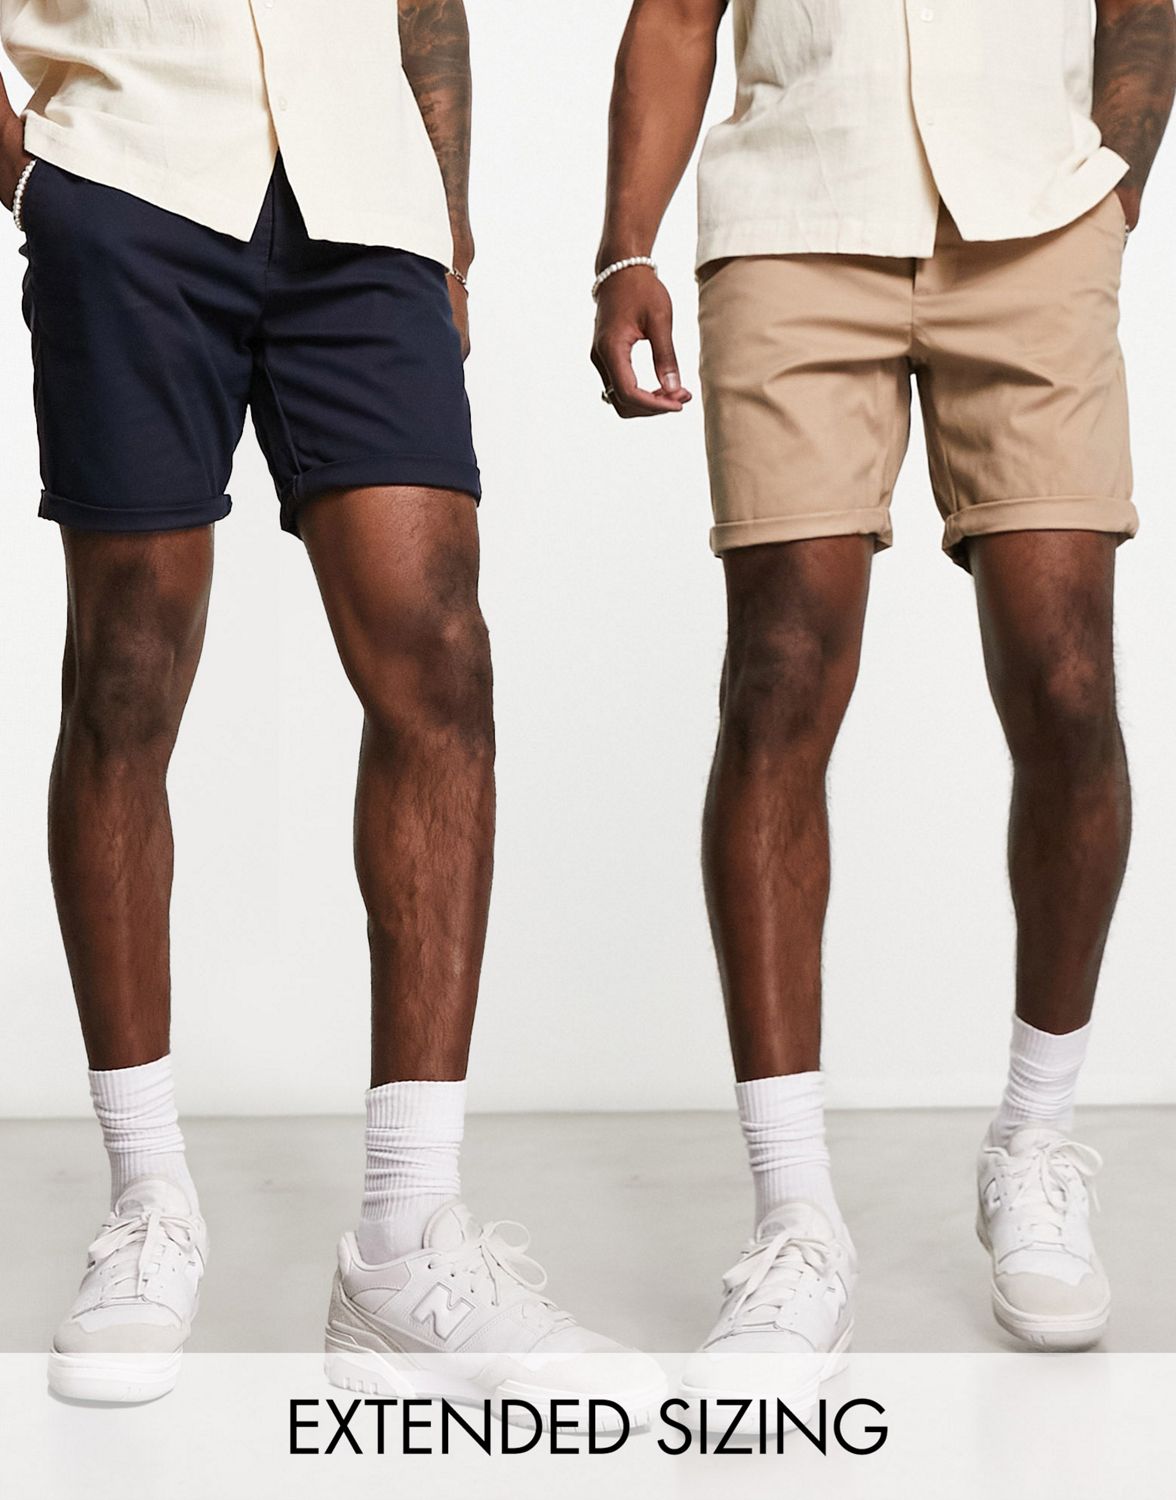 ASOS Men's & Women's Select Apparel $5 Sale: 2-Pack Men's Slim Chino Shorts $5 ($2.50 each), Men's Moccasin Slippers $5 & More + Free Shipping on $49+